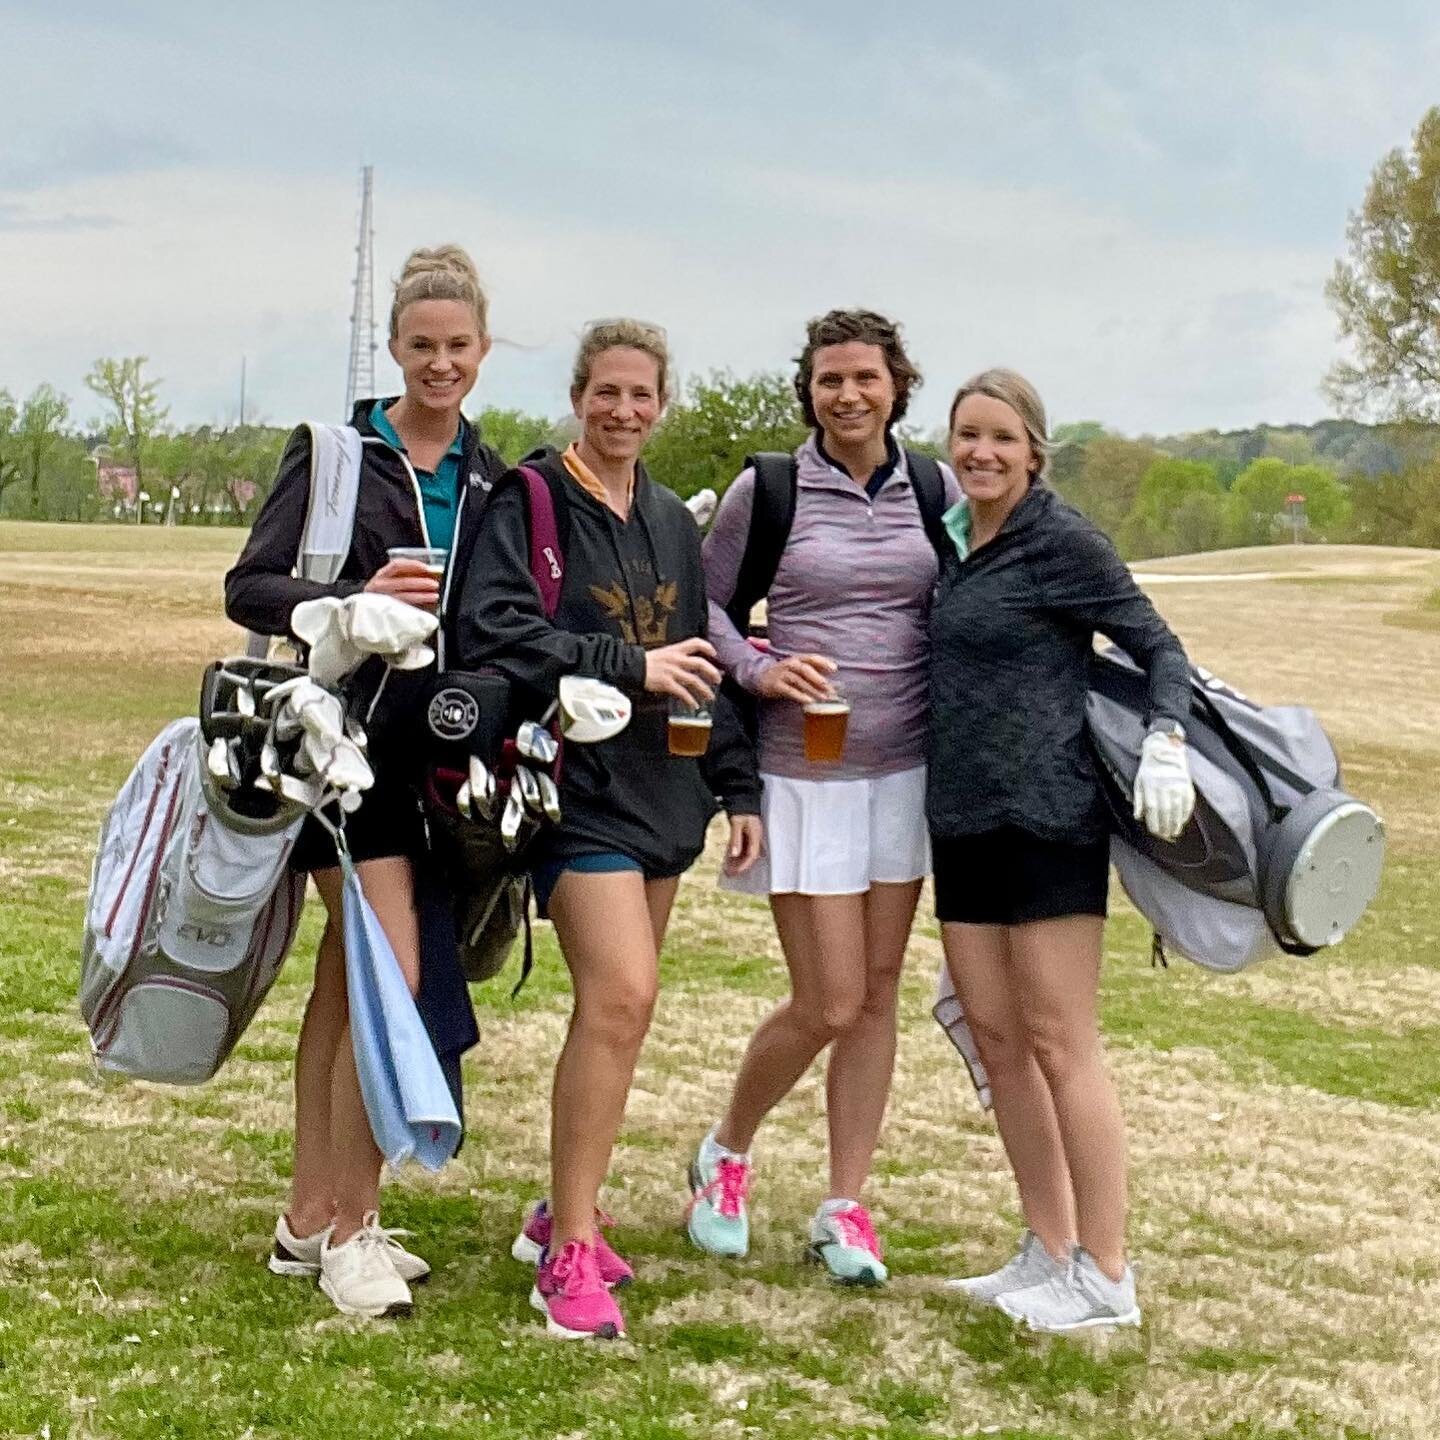 Had an awesome time playing golf with these lovely ladies last Friday! Thank you for the invite! It was my first time playing since probably October. I have to get out more!
Once again, repping @brewery.legitimus 🍺 It would seem that I have an entir